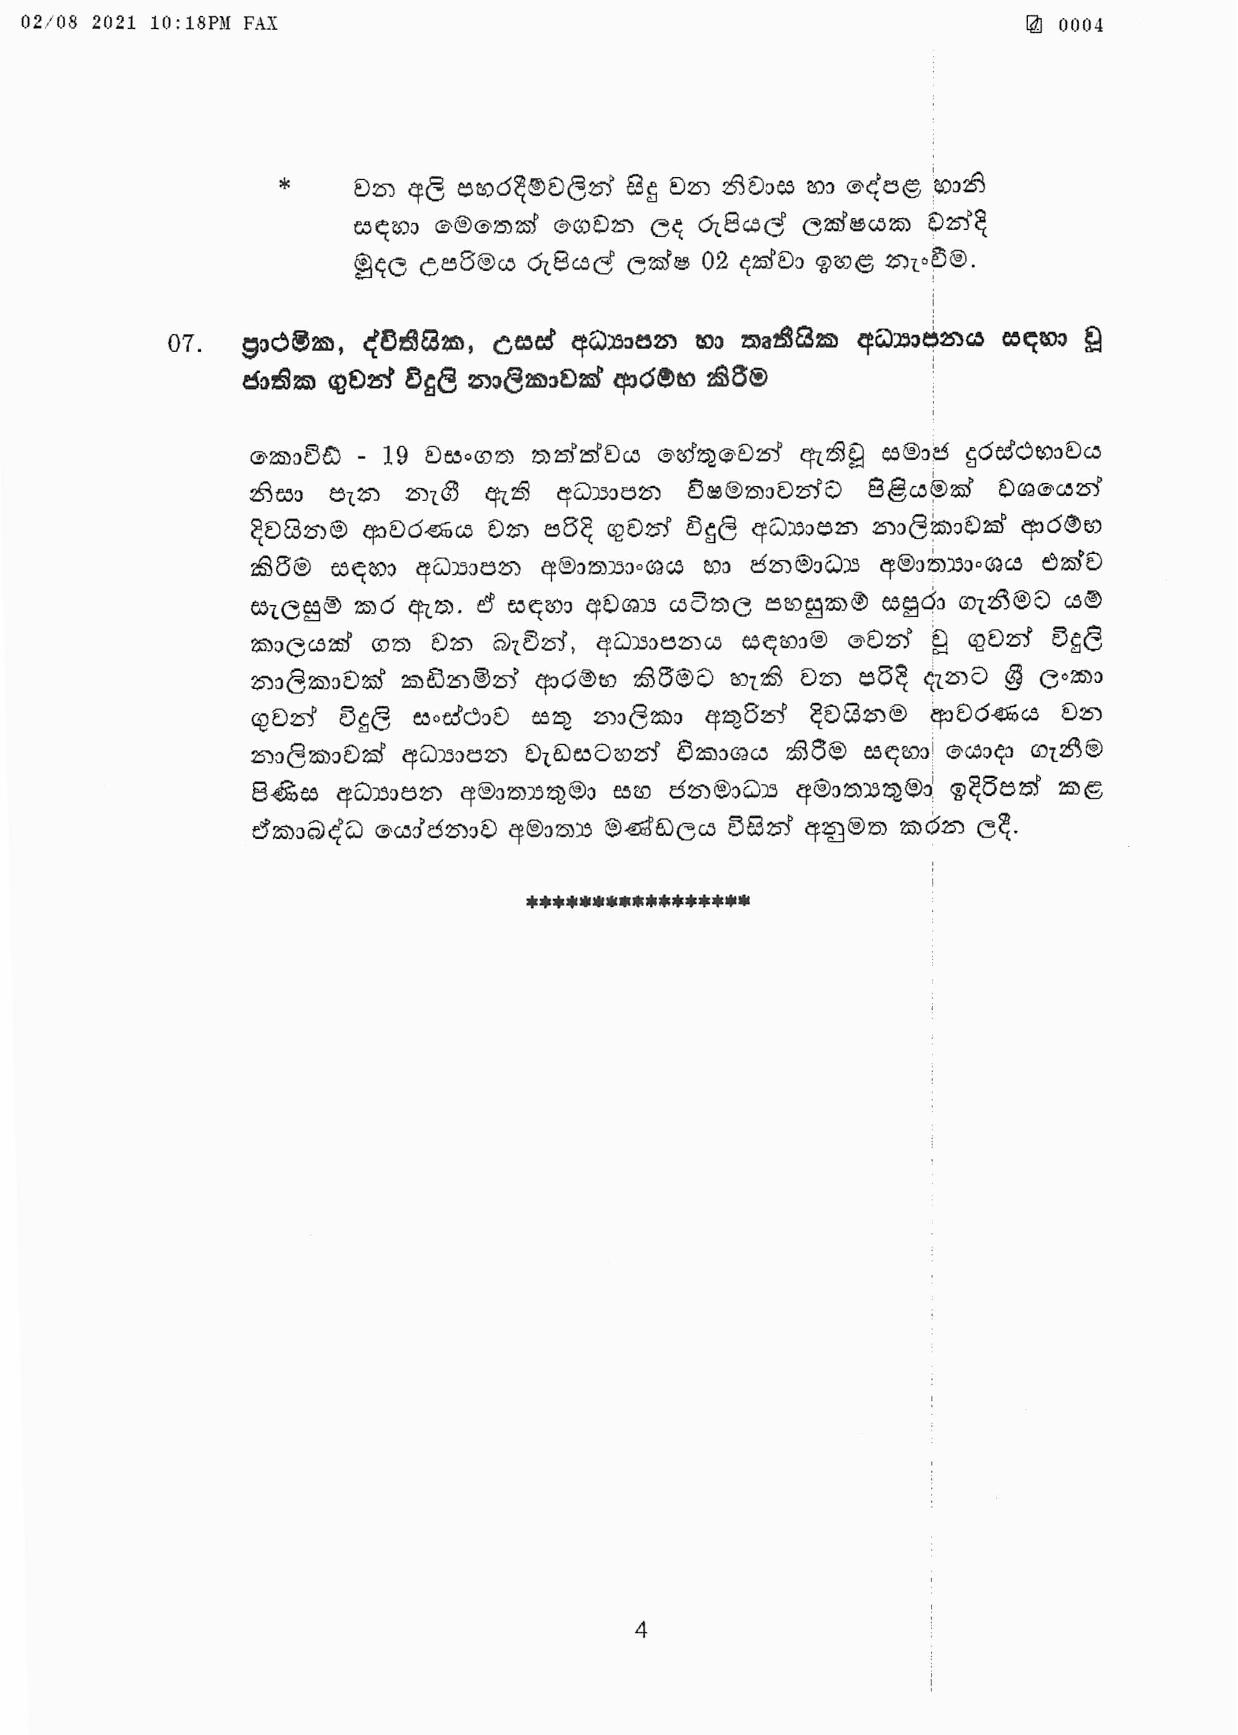 Cabinet Decisions on 02.08.2021 page 004